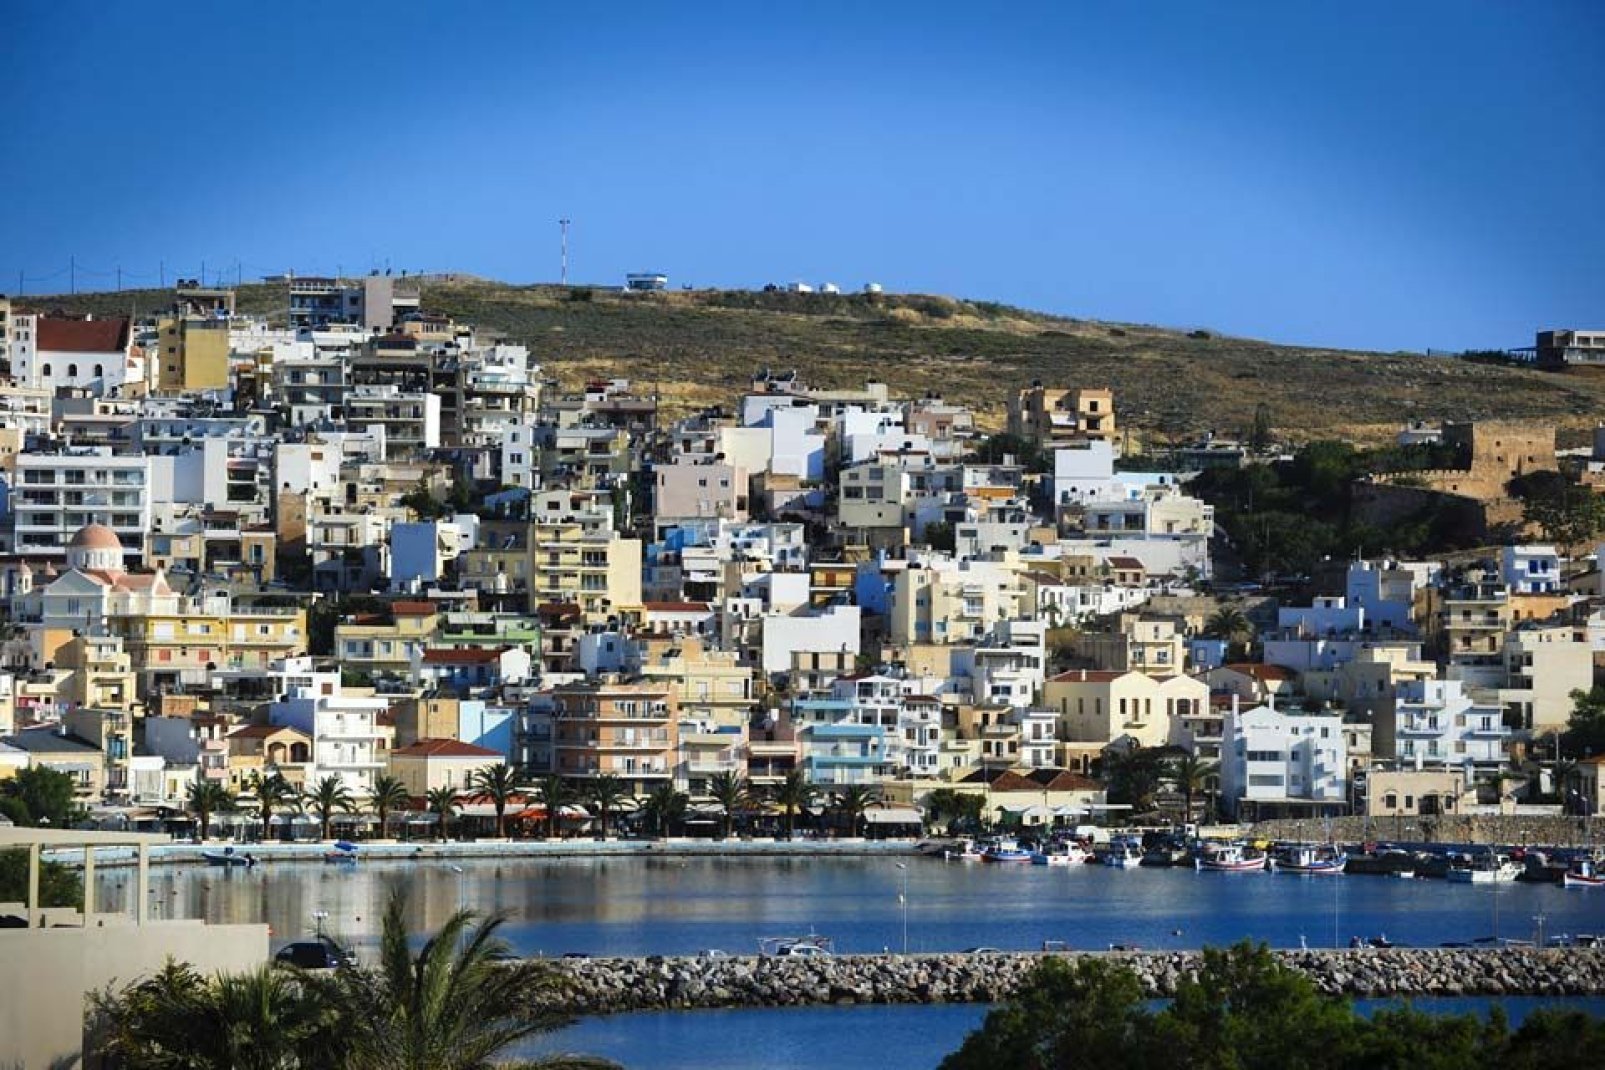 East of Crete and 47 miles from Agio Nikolaos, Sitia is a peaceful seaside town.